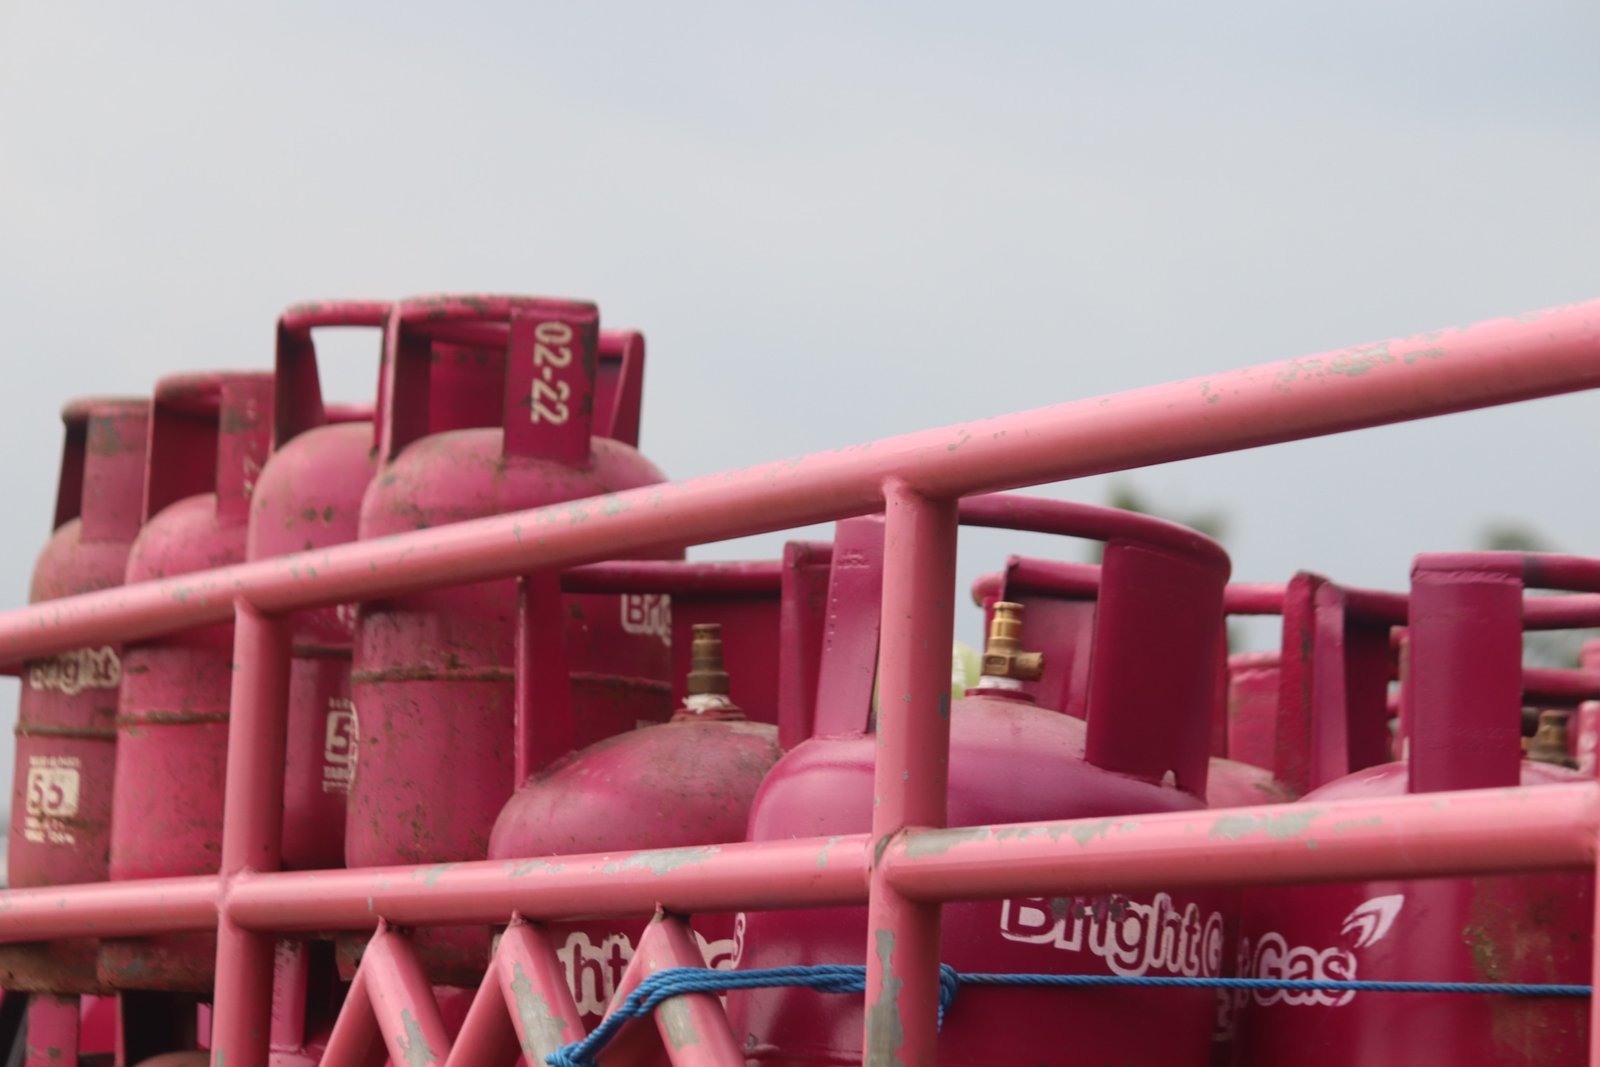 The increase in LPG prices will be disastrous, as people will turn to coal and wood